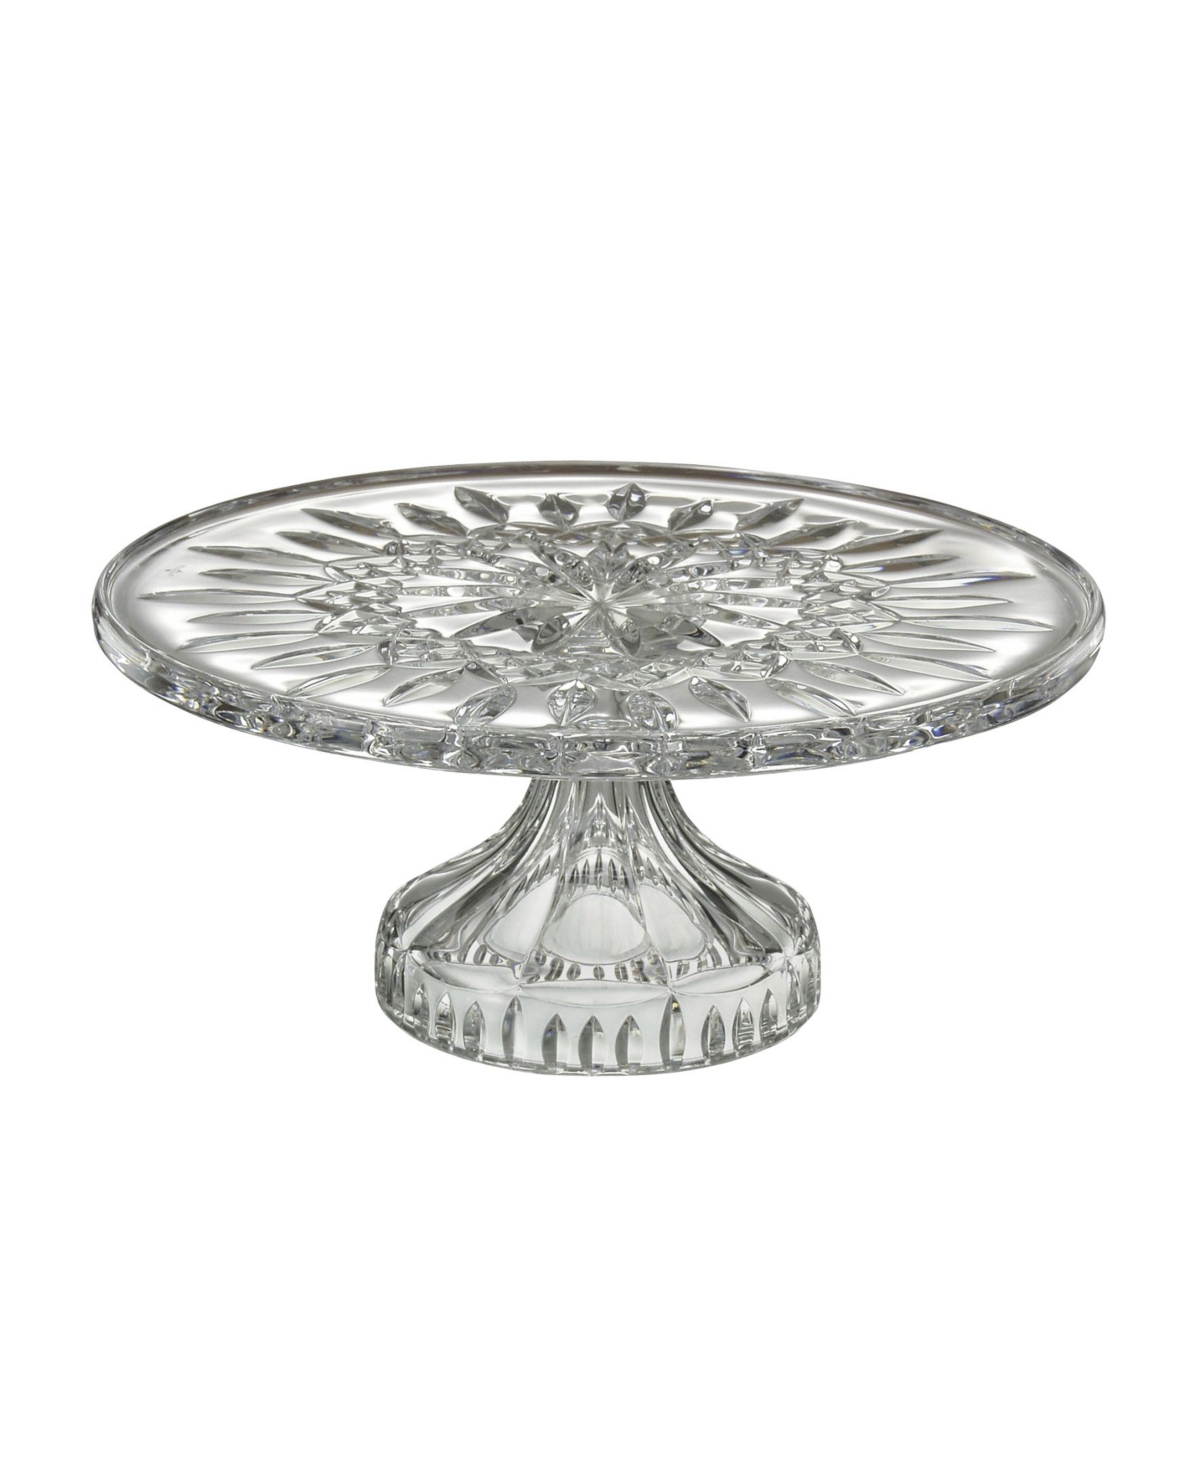 Waterford Lismore 11" Cake Plate Footed In Clear